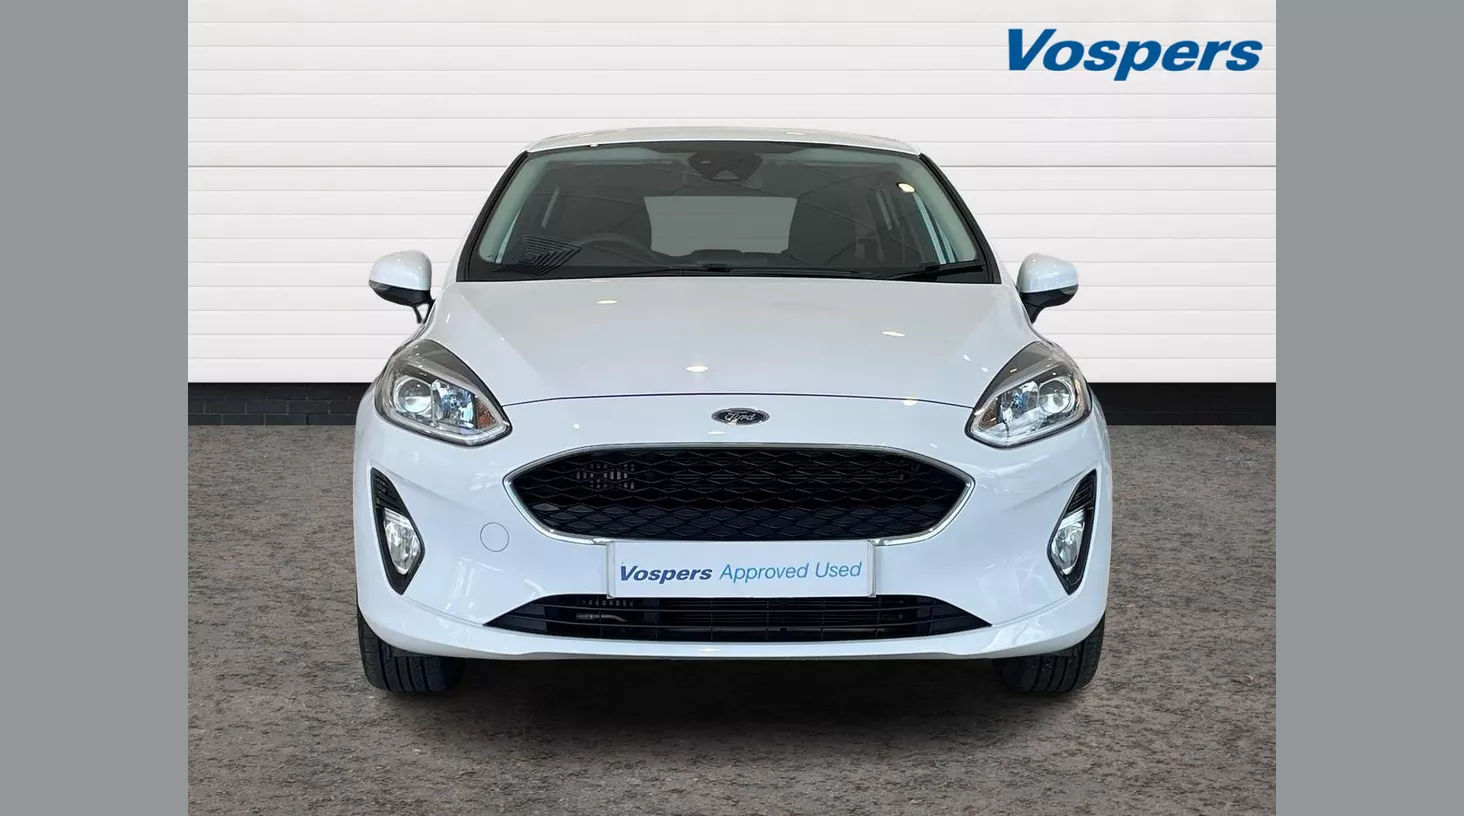 Ford Fiesta 1.0 EcoBoost 95 Trend 5dr